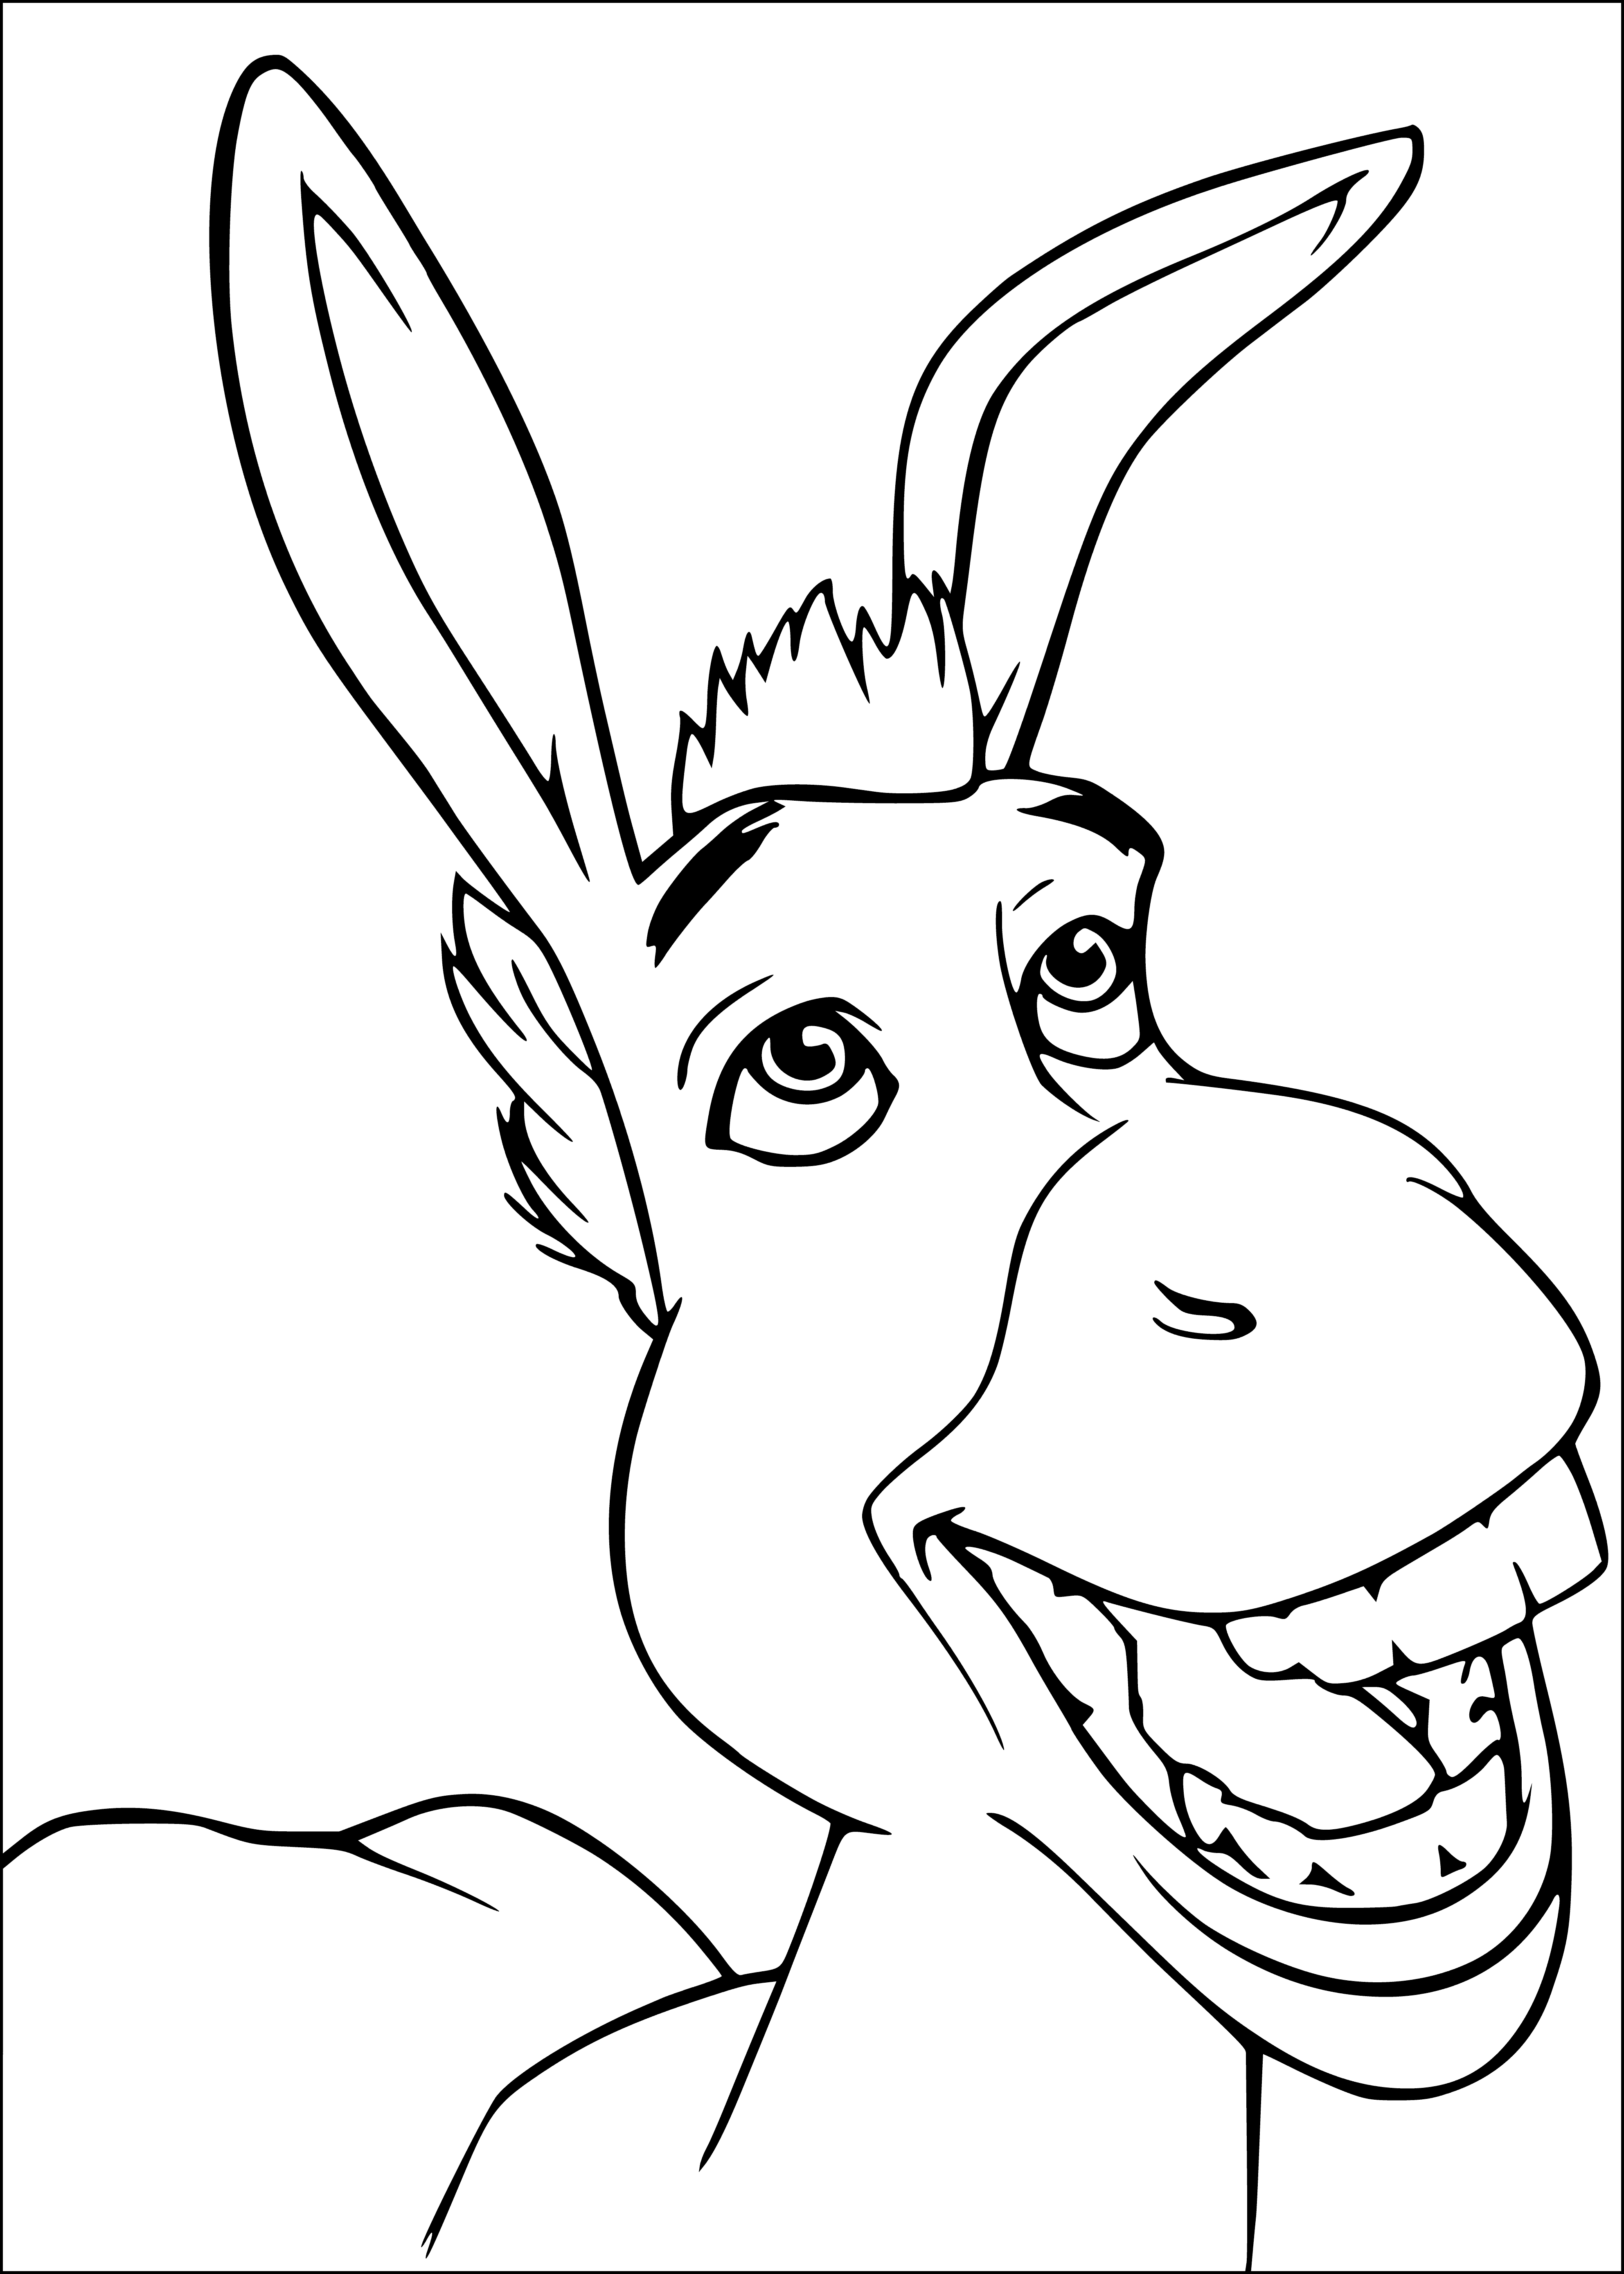 A donkey coloring page